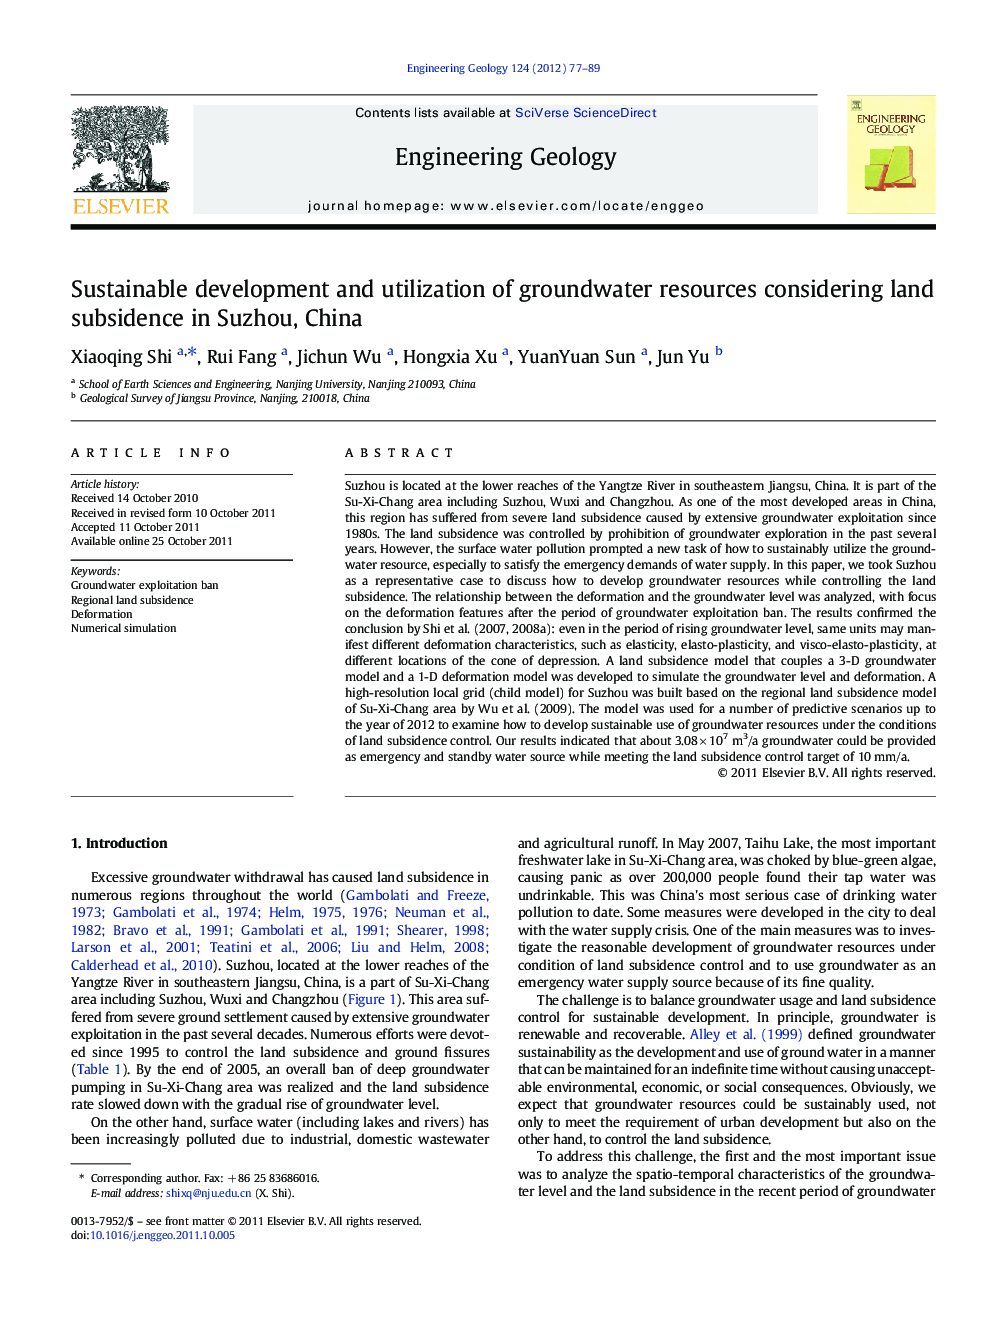 Sustainable development and utilization of groundwater resources considering land subsidence in Suzhou, China